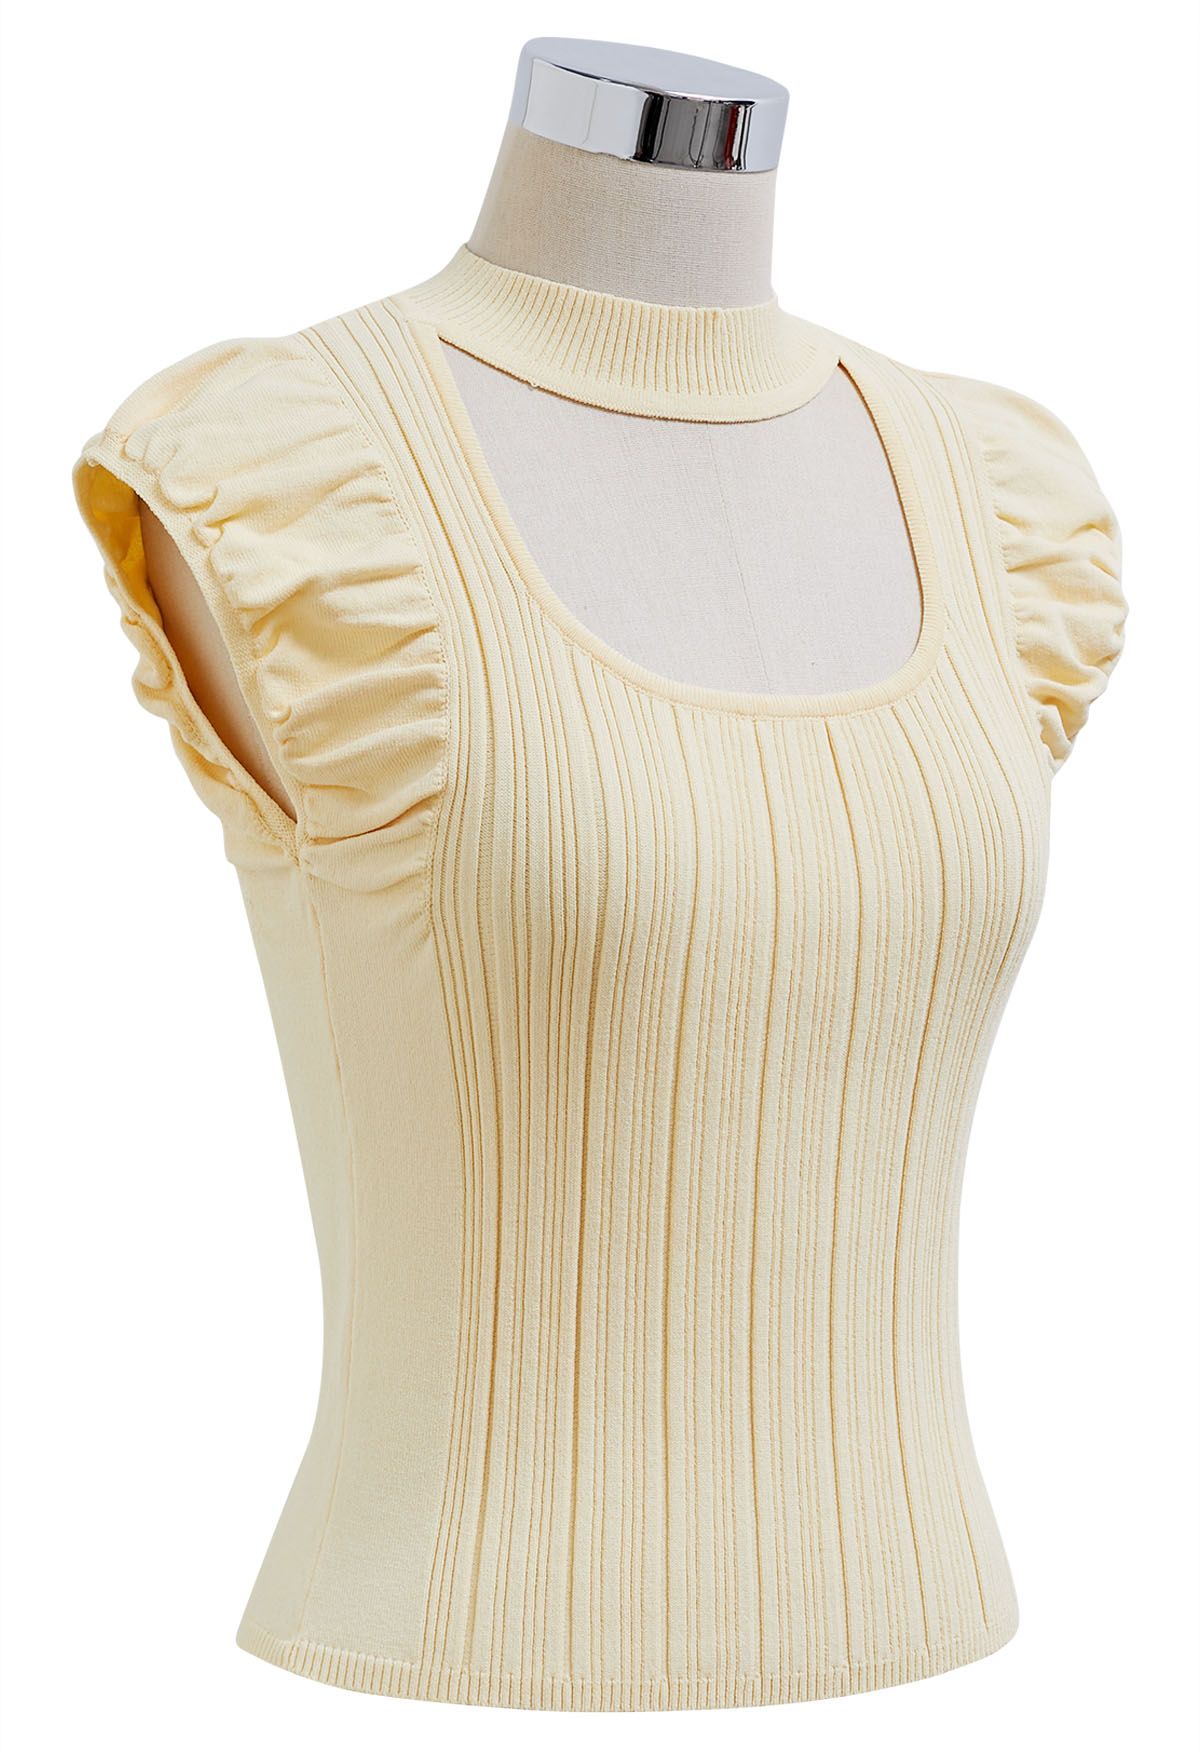 Choker Neck Ruched Cap Sleeves Knit Top in Light Yellow